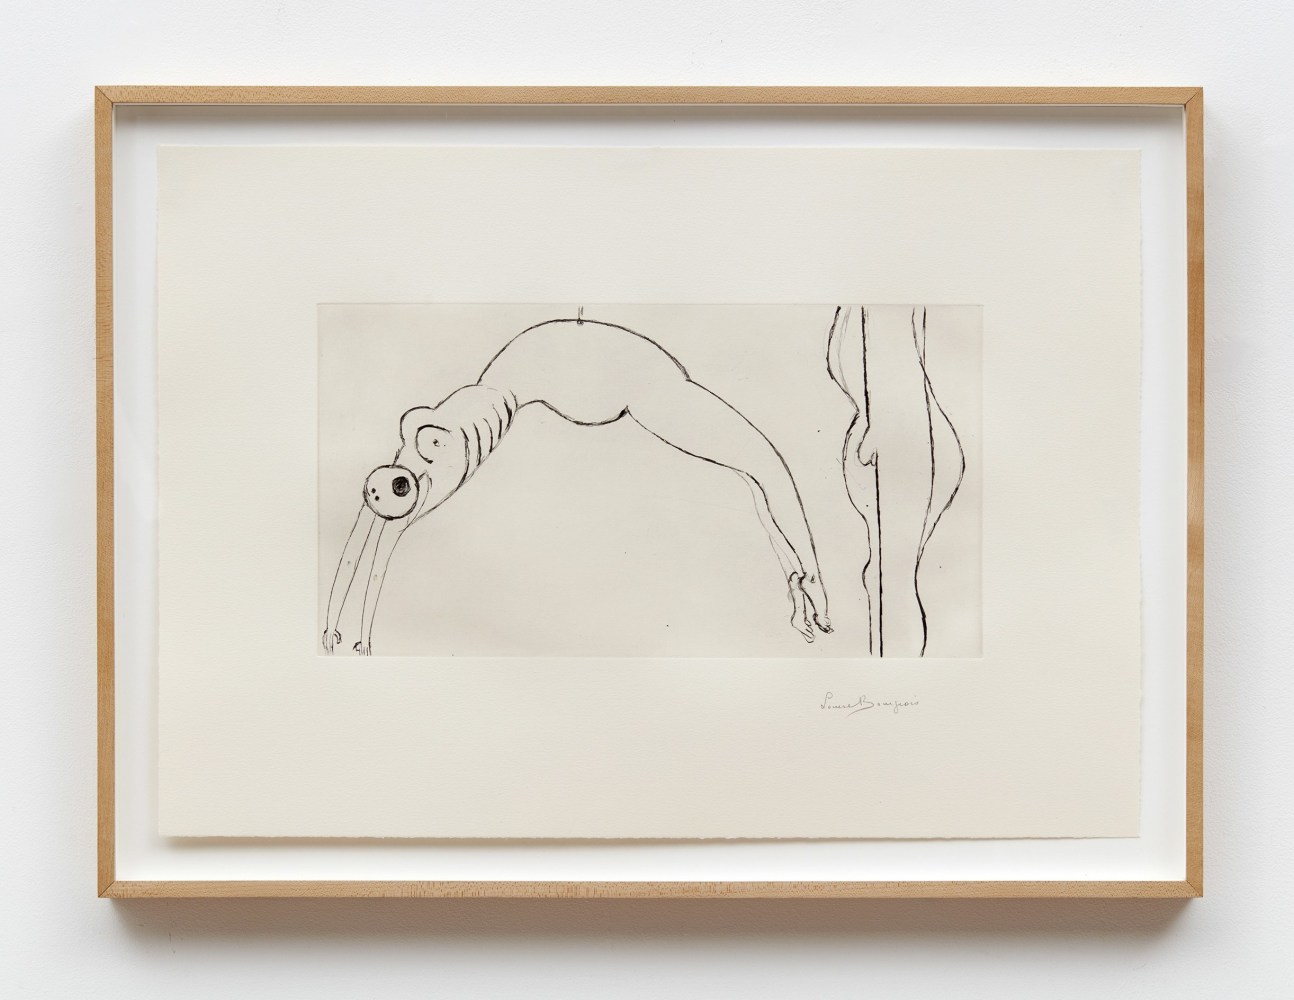 Louise Bourgeois&amp;nbsp;
Arched Figure, 1993&amp;nbsp;
Drypoint on Arches paper&amp;nbsp;
15 5/8 x 22 inches (39.5 x 56 cm)&amp;nbsp;
Edition of 50 + proofs&amp;nbsp;
Printed by Harlan&amp;nbsp;&amp;amp; Weaver Intaglio, New York
Published by Peter Blum Edition, New York&amp;nbsp;